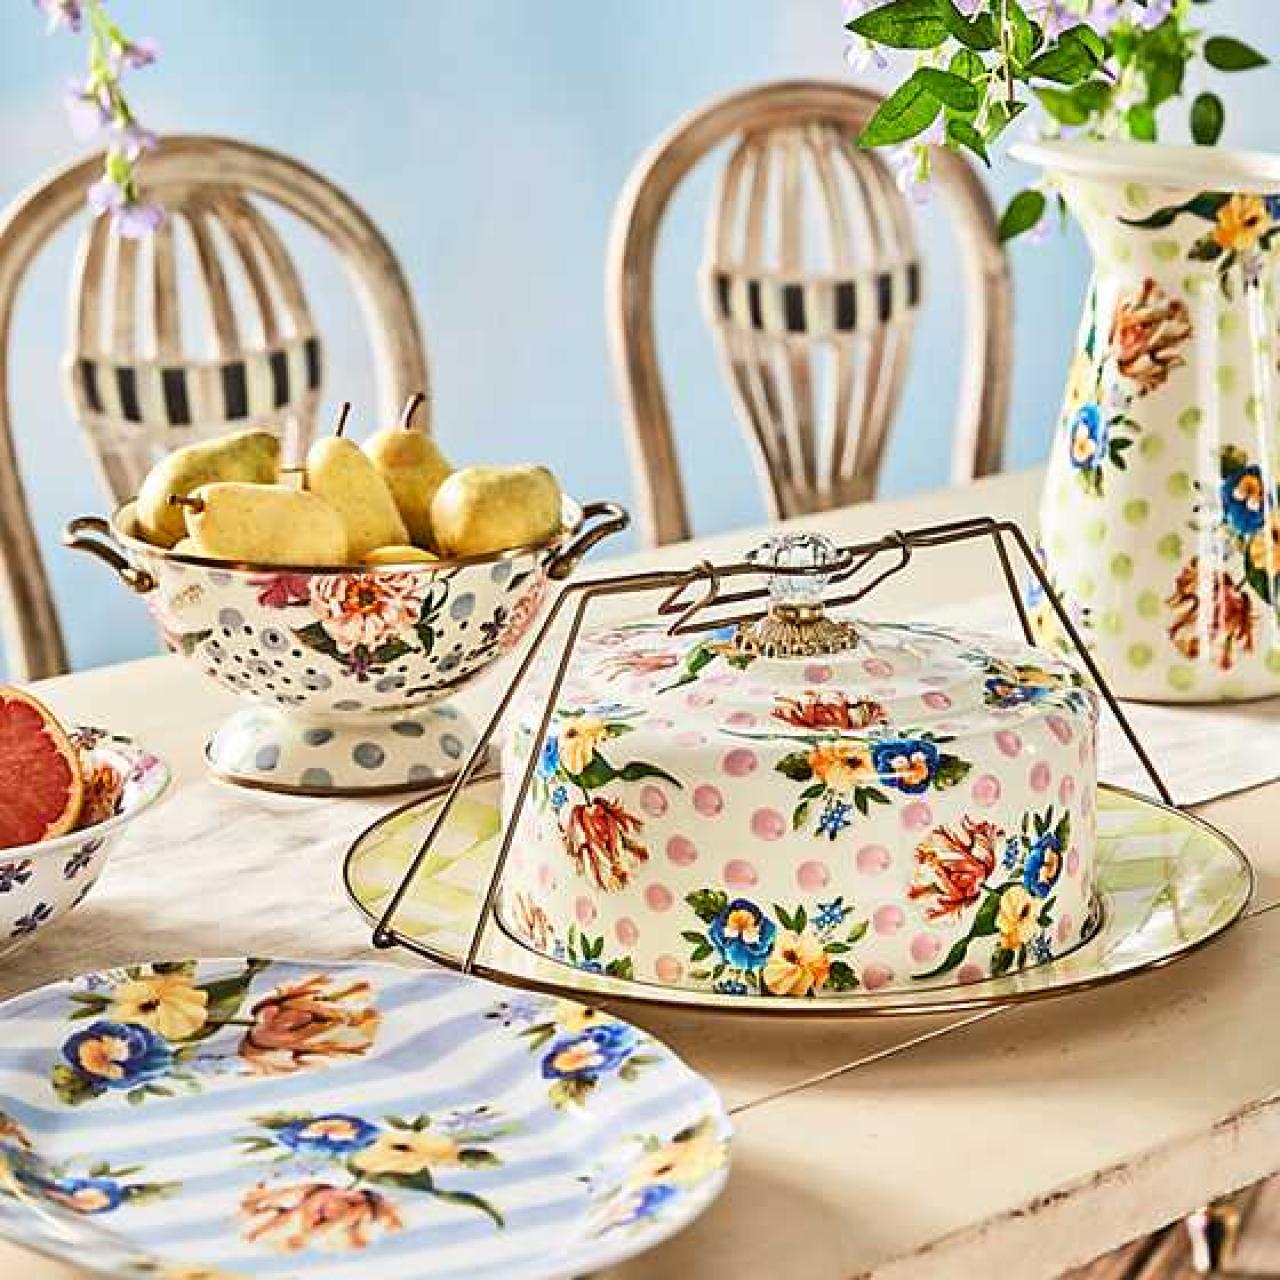 https://food.fnr.sndimg.com/content/dam/images/food/products/2023/4/19/rx_mackenzie-childs-wildflowers-enamel-cake-carrier.jpeg.rend.hgtvcom.1280.1280.suffix/1681936733807.jpeg